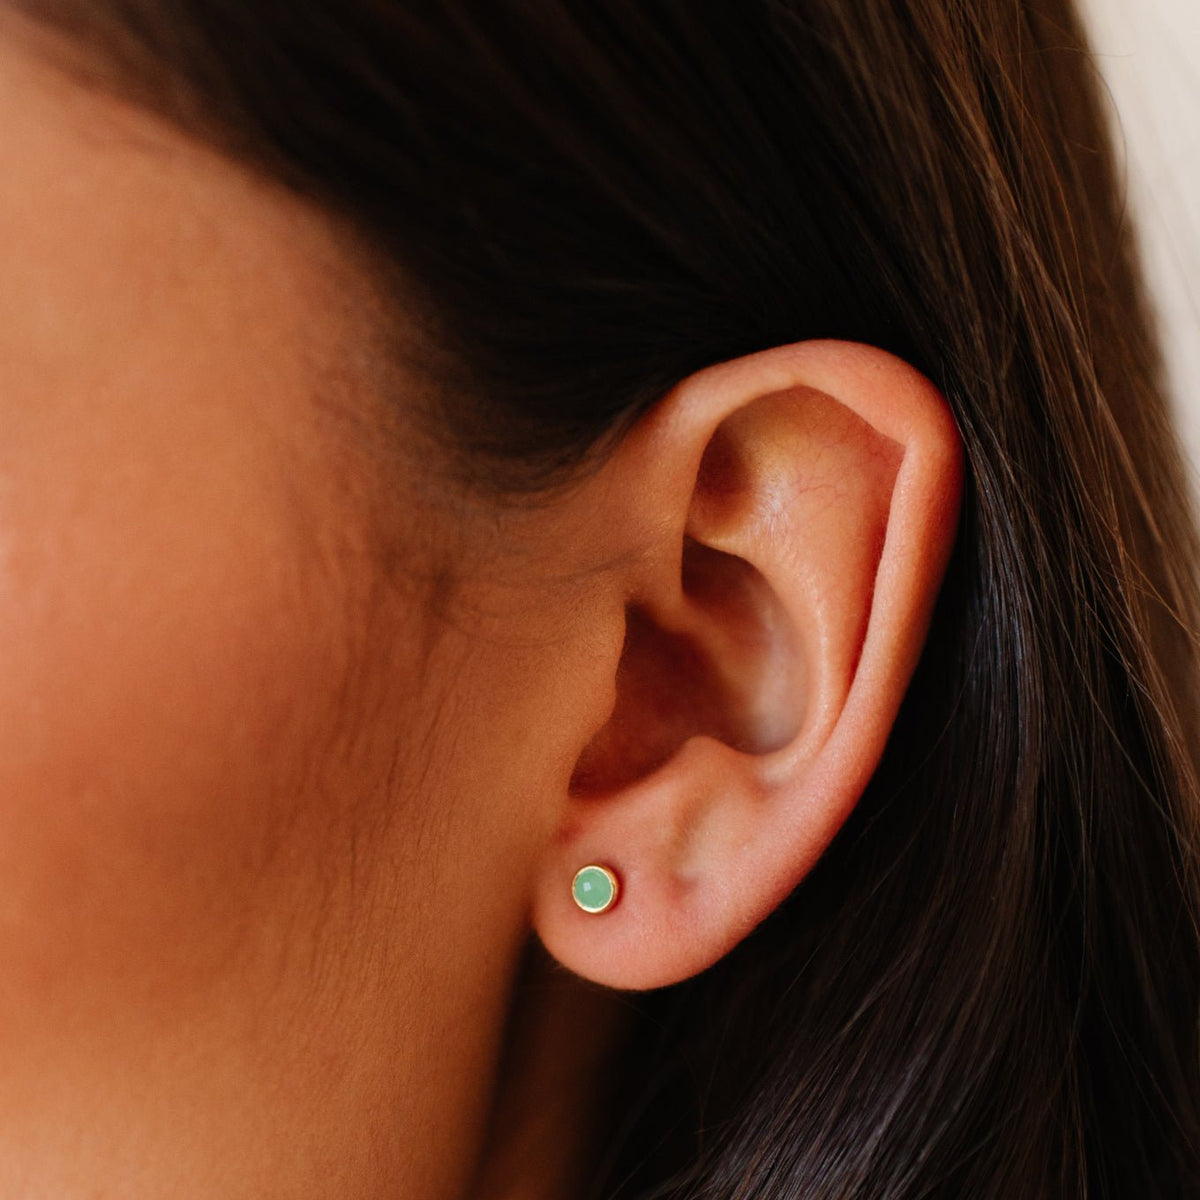 TINY PROTECT STUD EARRINGS - CHRYSOPRASE &amp; GOLD - SO PRETTY CARA COTTER